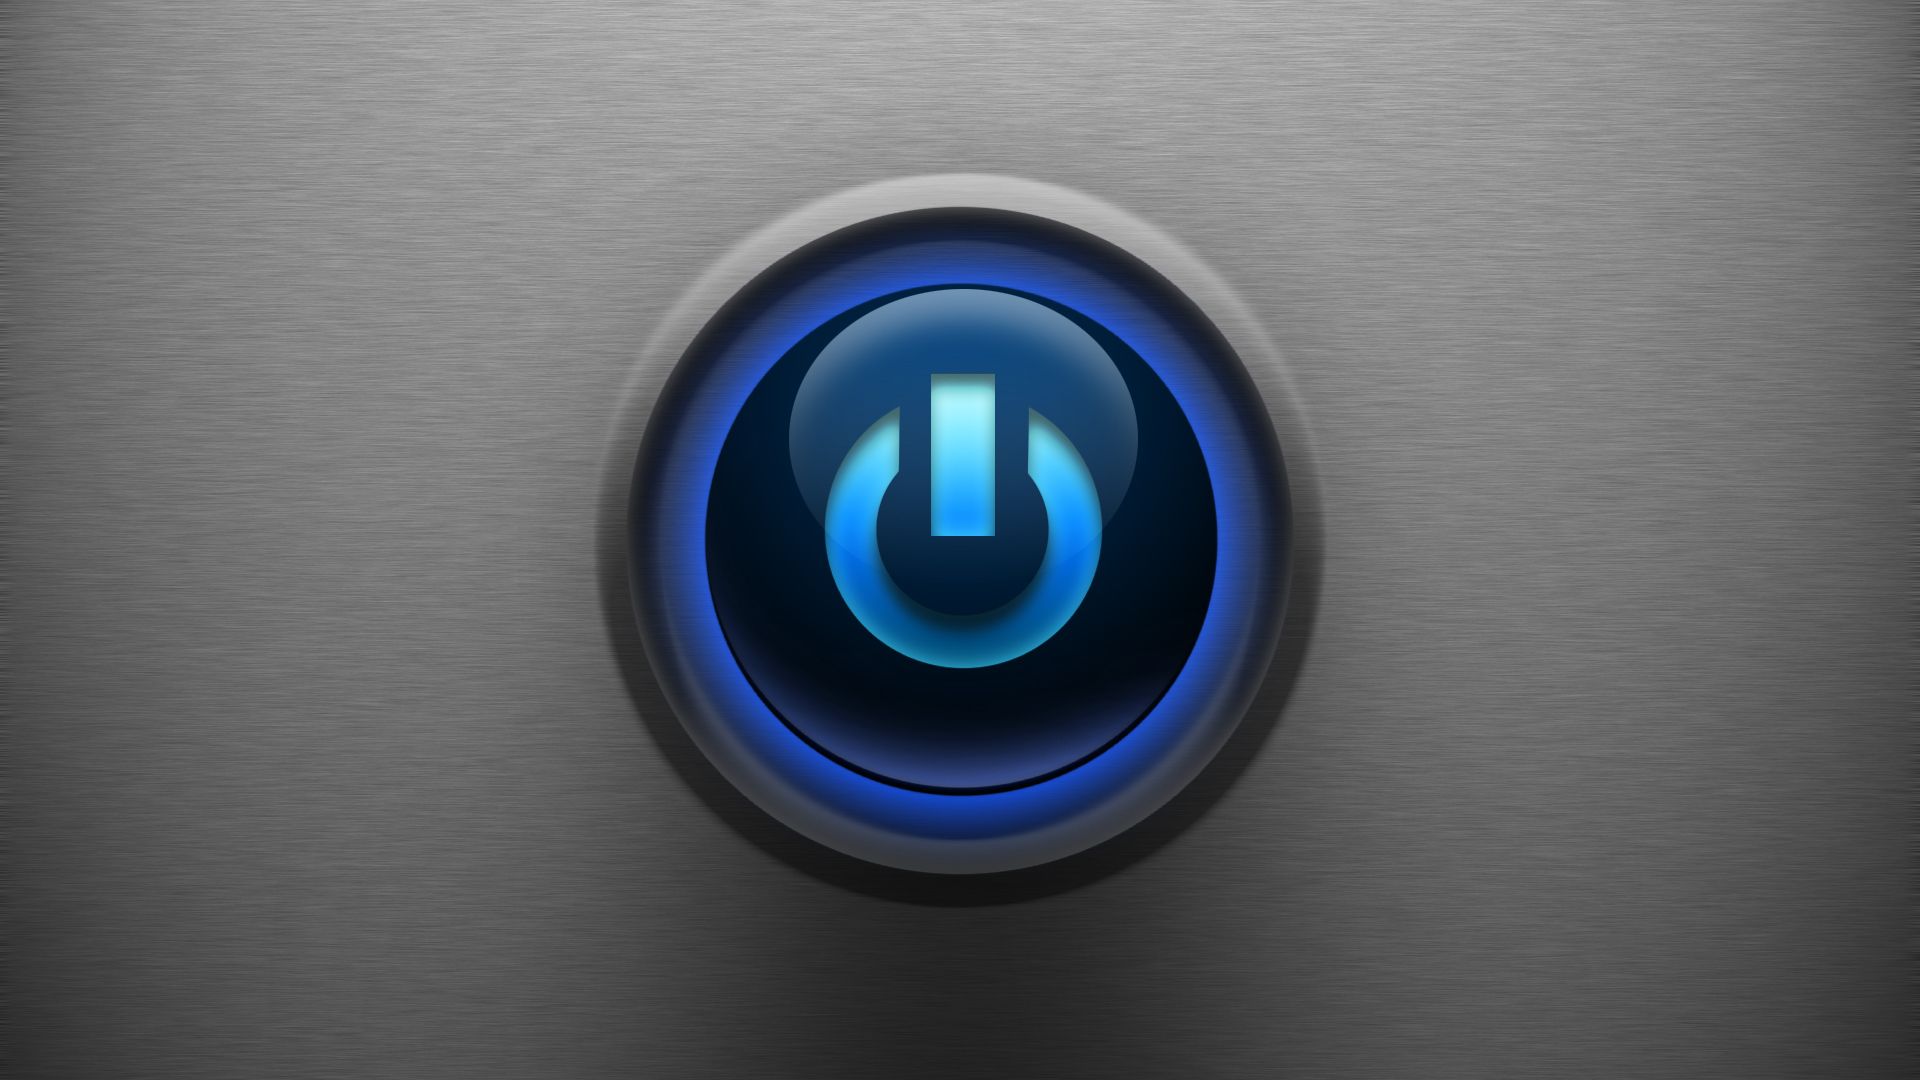 210 Emergency Shutdown Button Stock Photos Pictures  RoyaltyFree Images   iStock